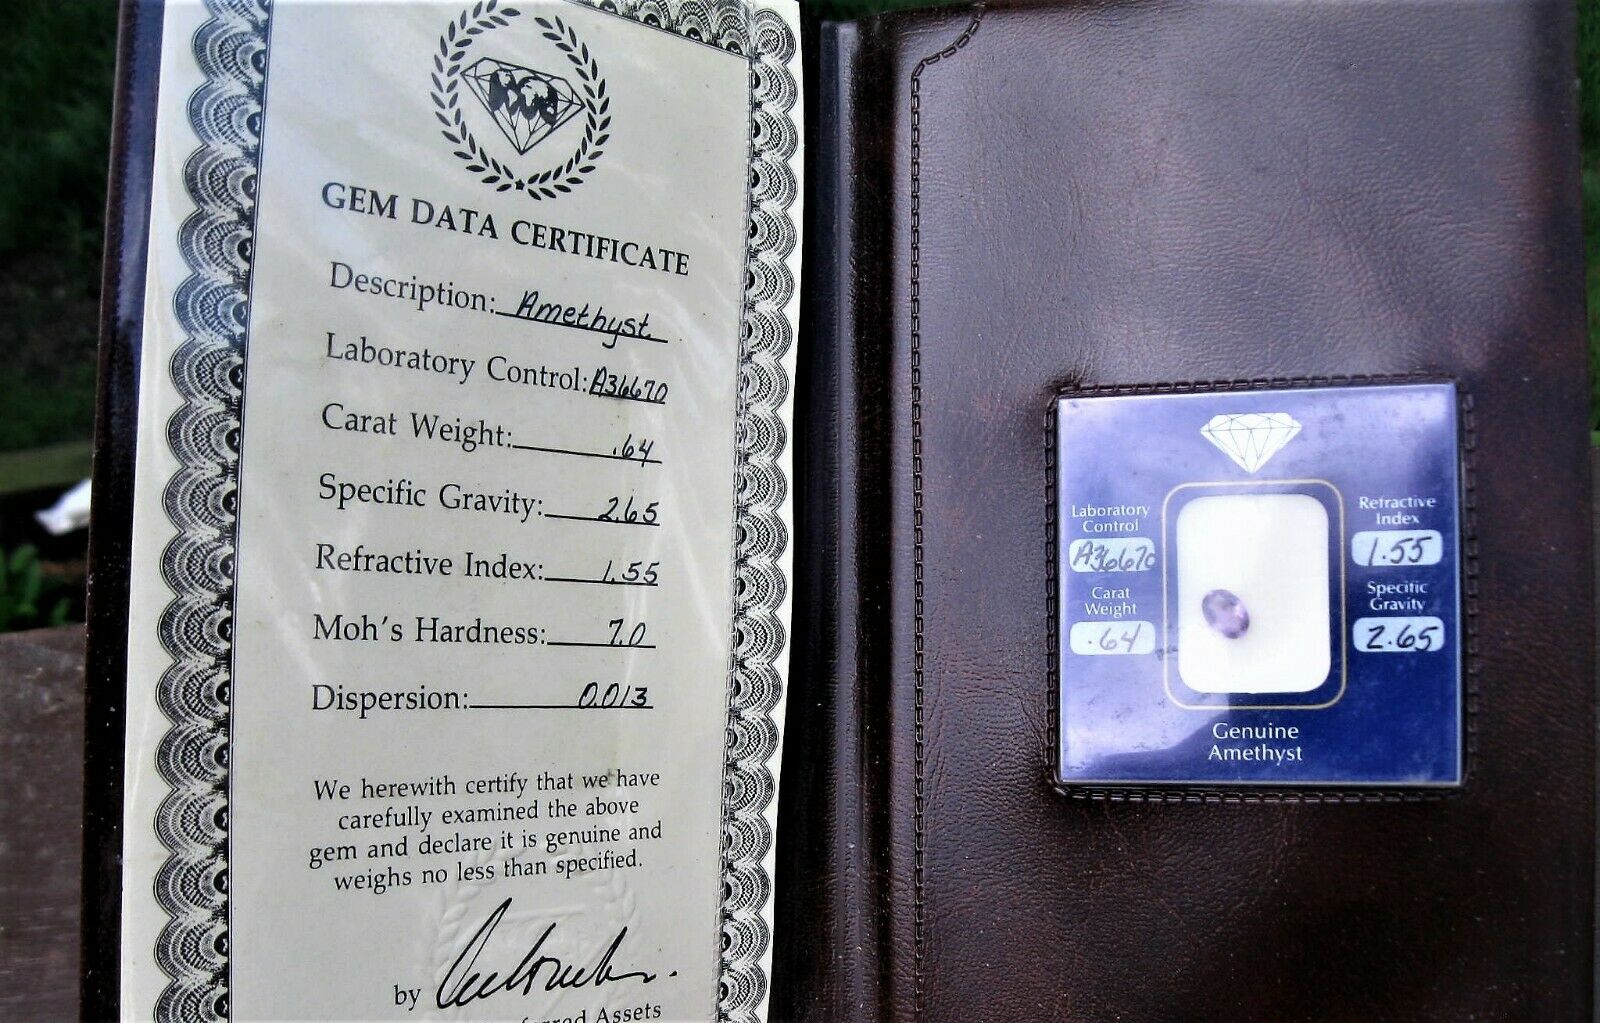 Amethyst Gemstone With Gem Data Certificate .64 Ctw In Faux Leather Wallet